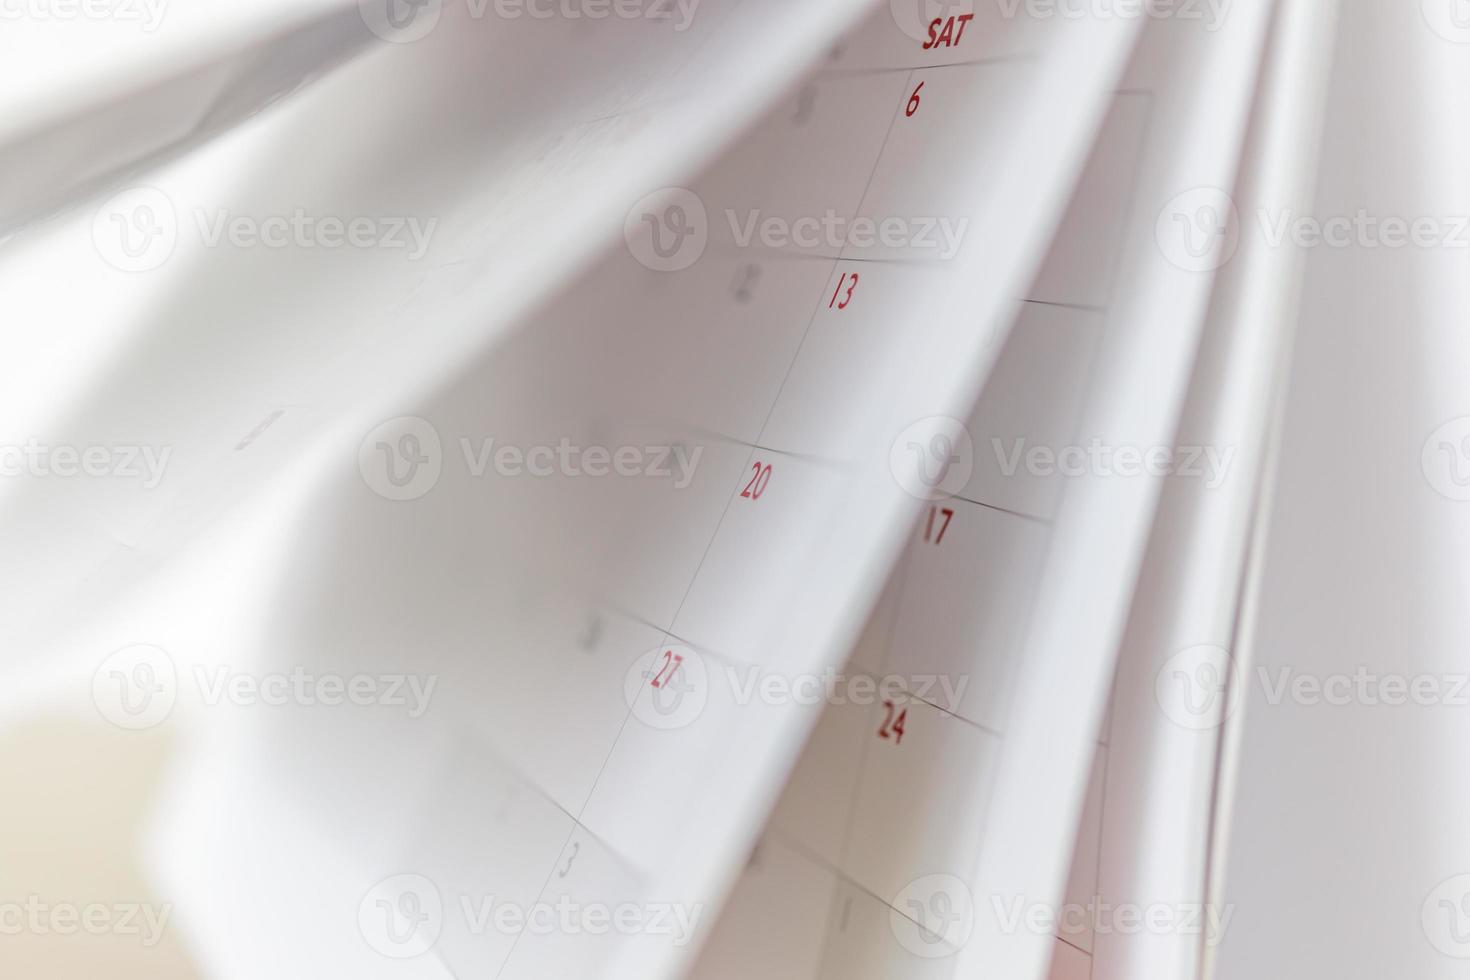 Calendar page flipping sheet close up blur background business schedule planning appointment meeting concept photo